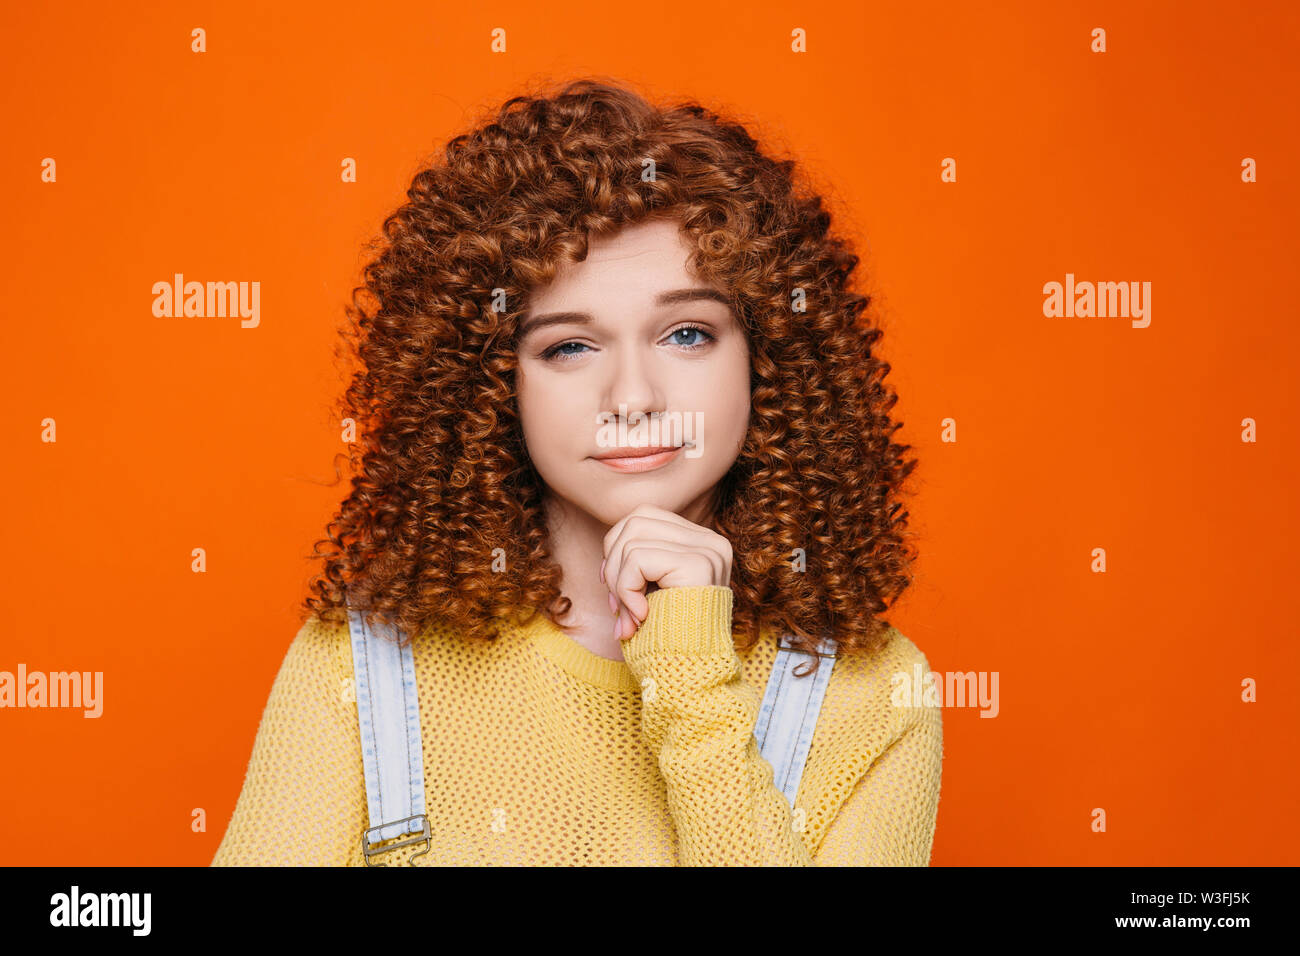 Cute red-haired woman with curly hair skeptical looking, raising one eyebrow. Stock Photo